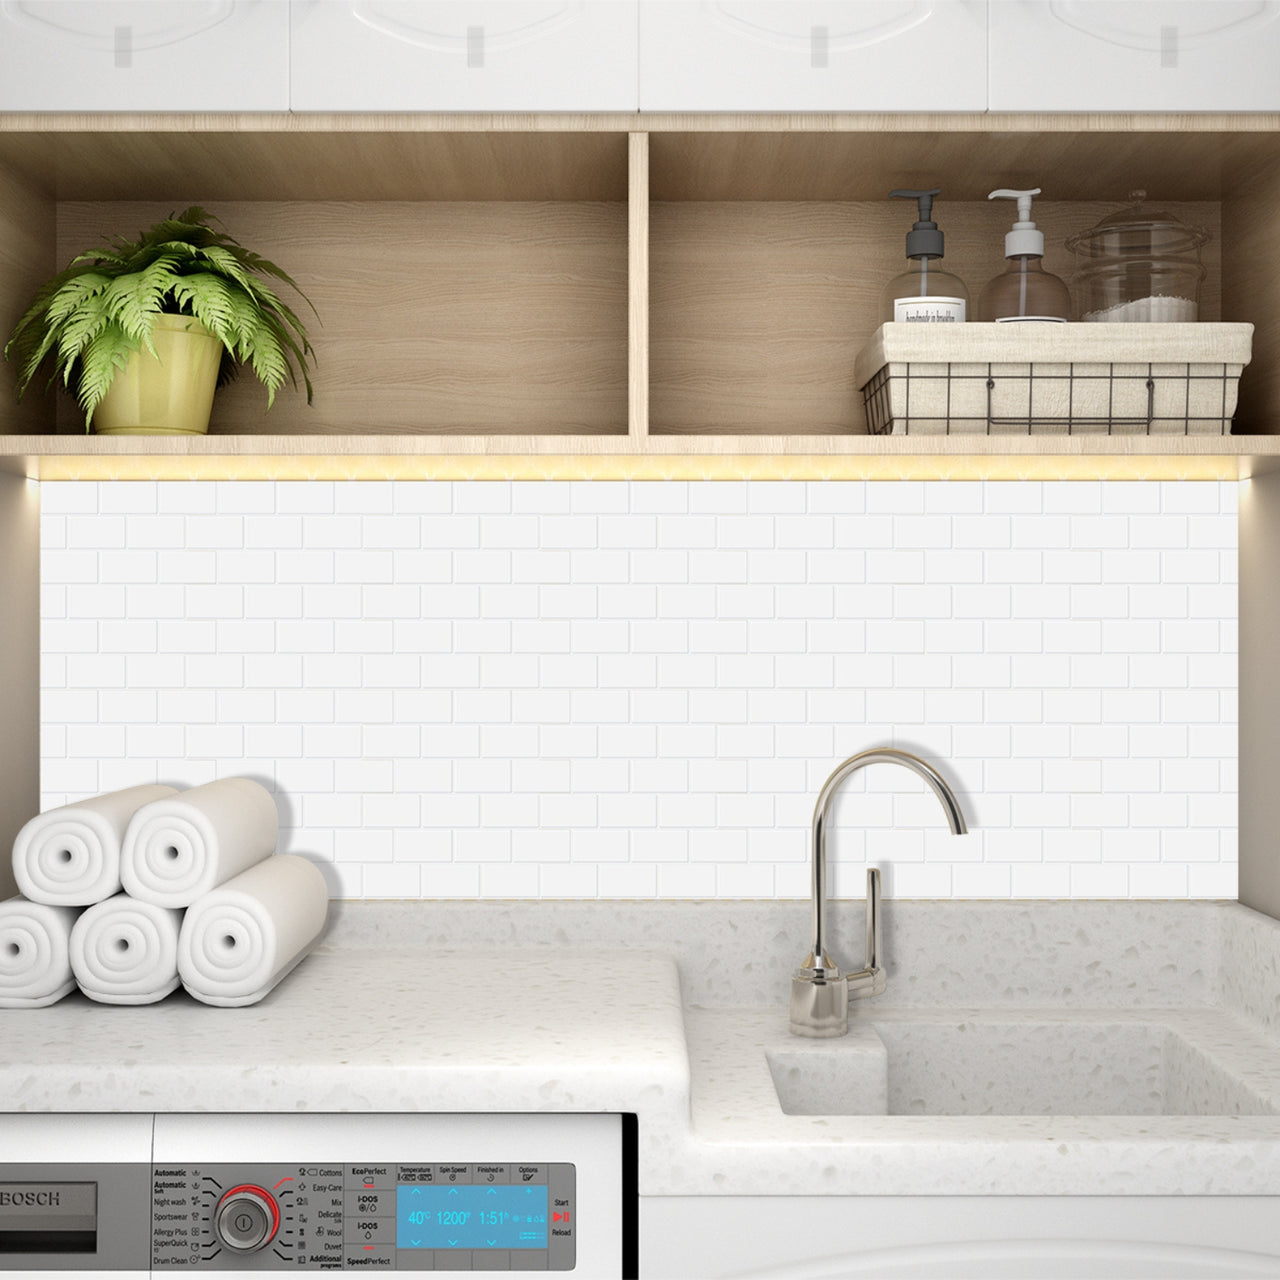 White subway tiles with white grout in laundry